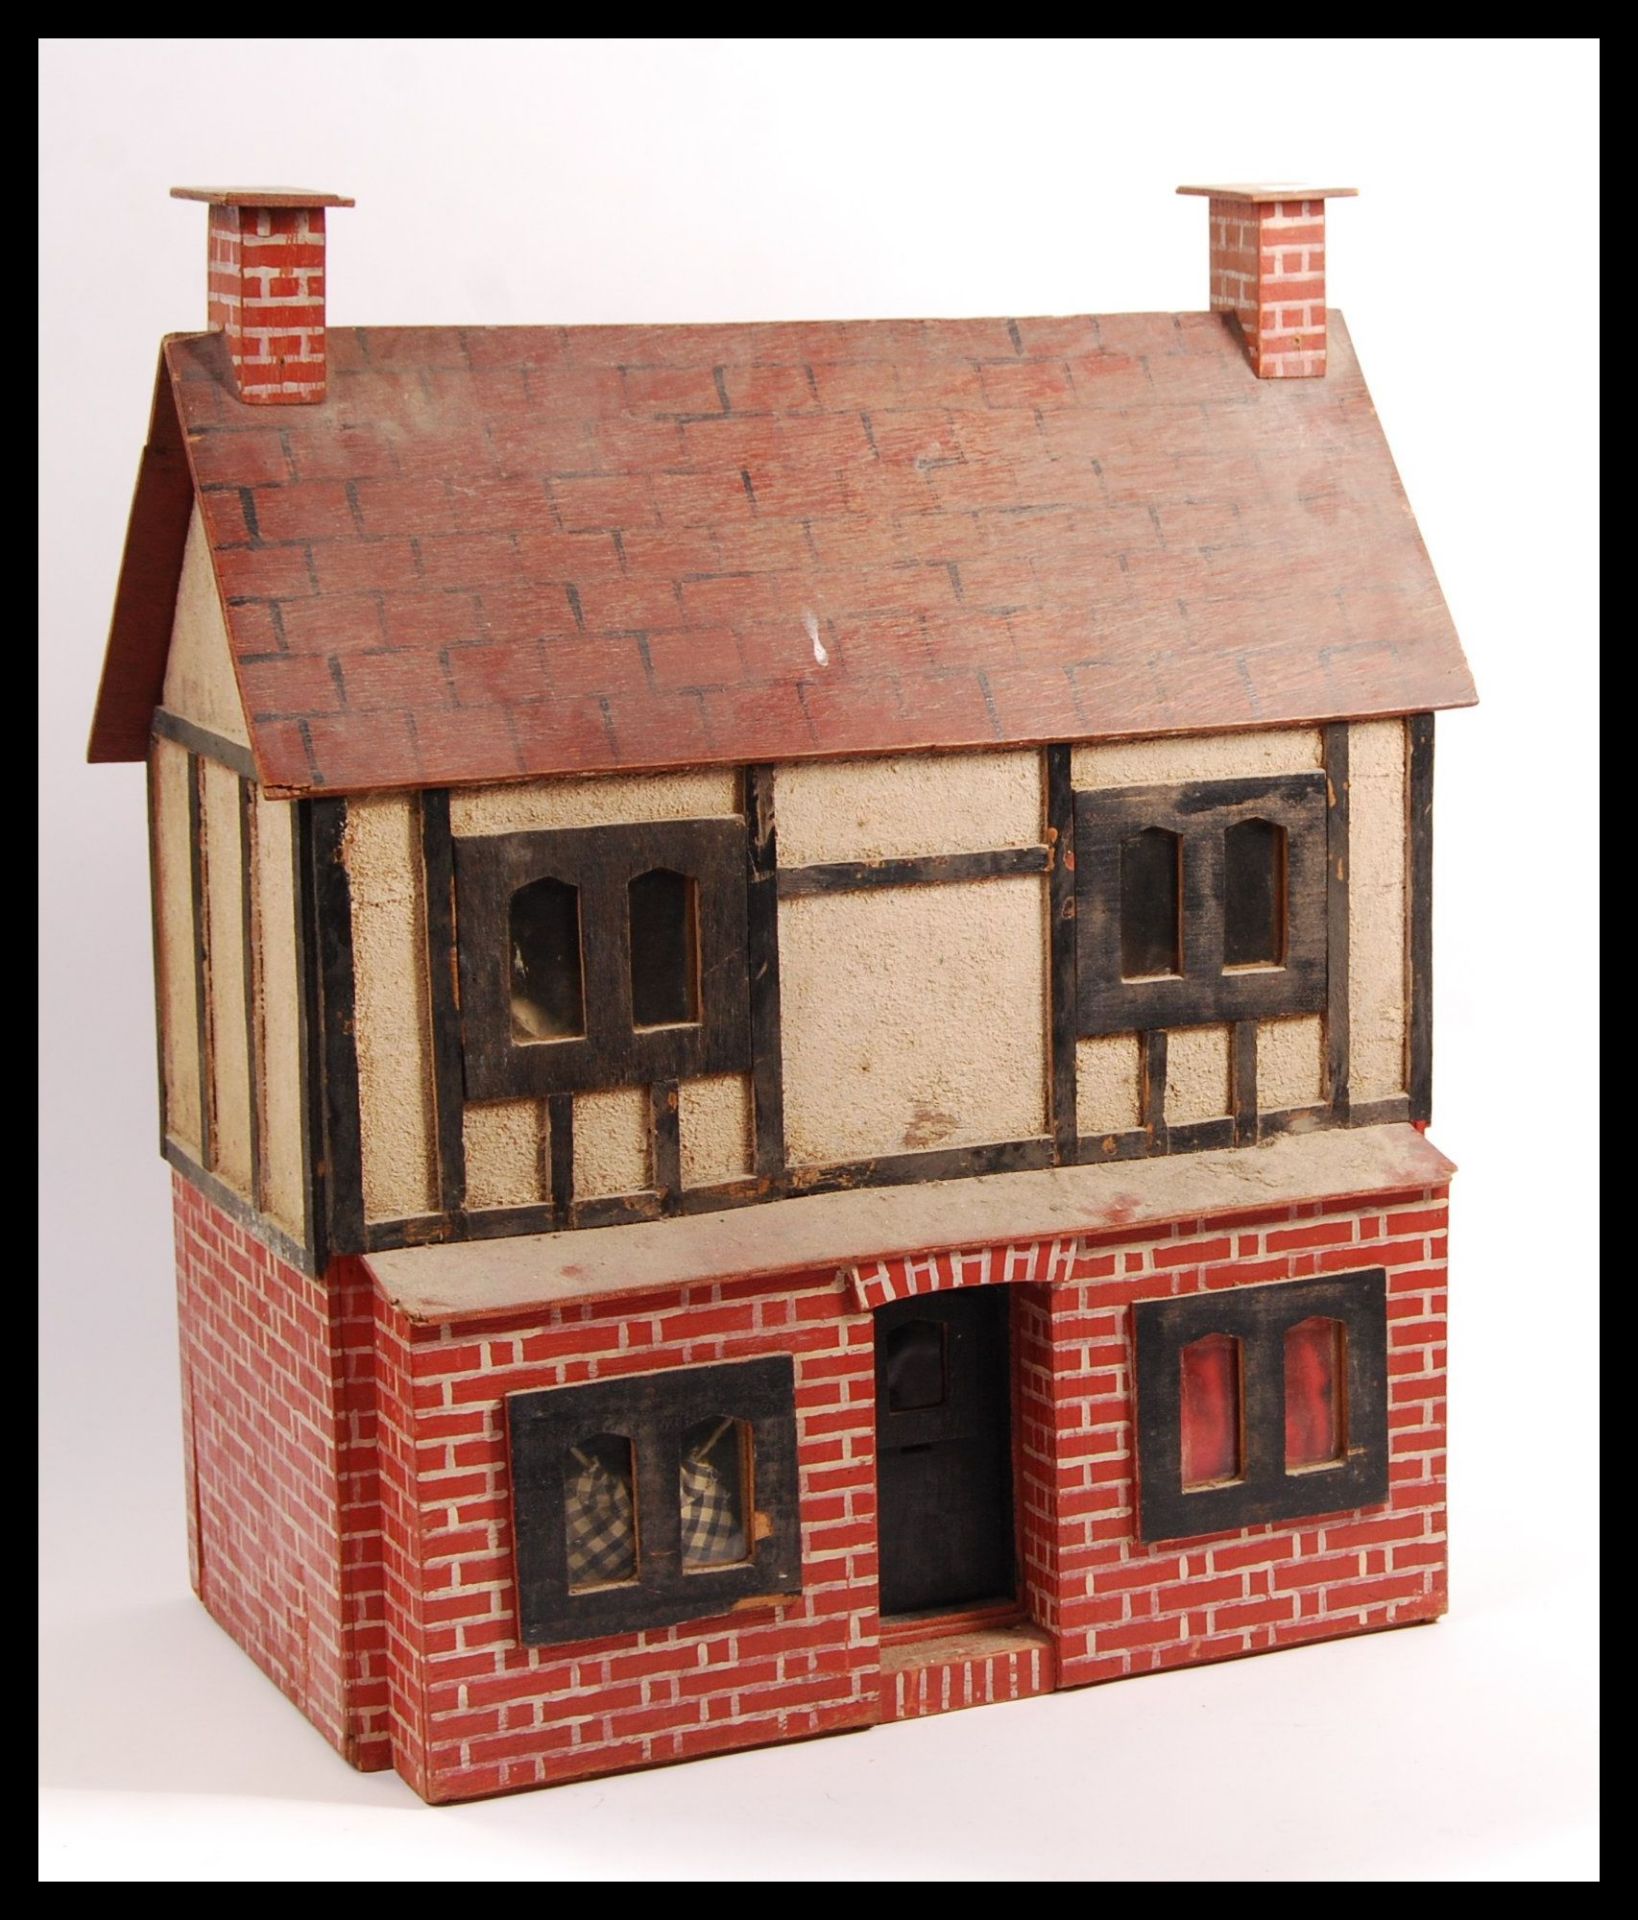 VINTAGE 1960'S TRIANG STYLE TUDOR STYLE DOLLS HOUSE.